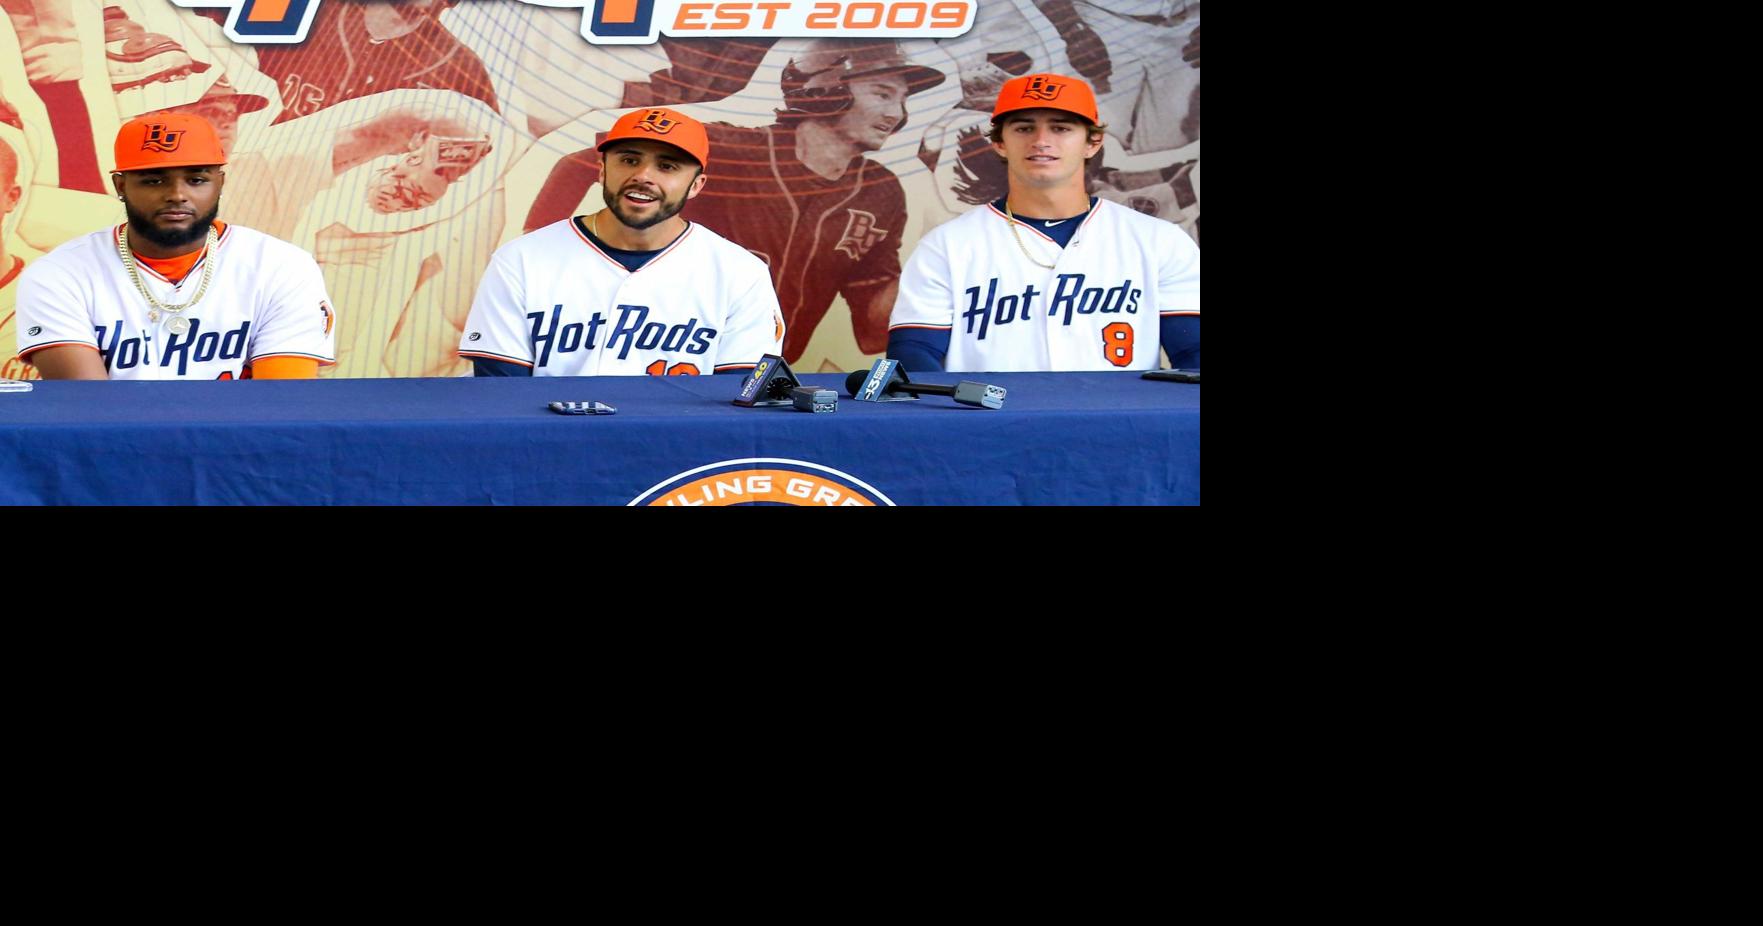 New Hot Rods Manager Rafael Valenzuela Takes Jump to Bowling Green - WNKY  News 40 Television